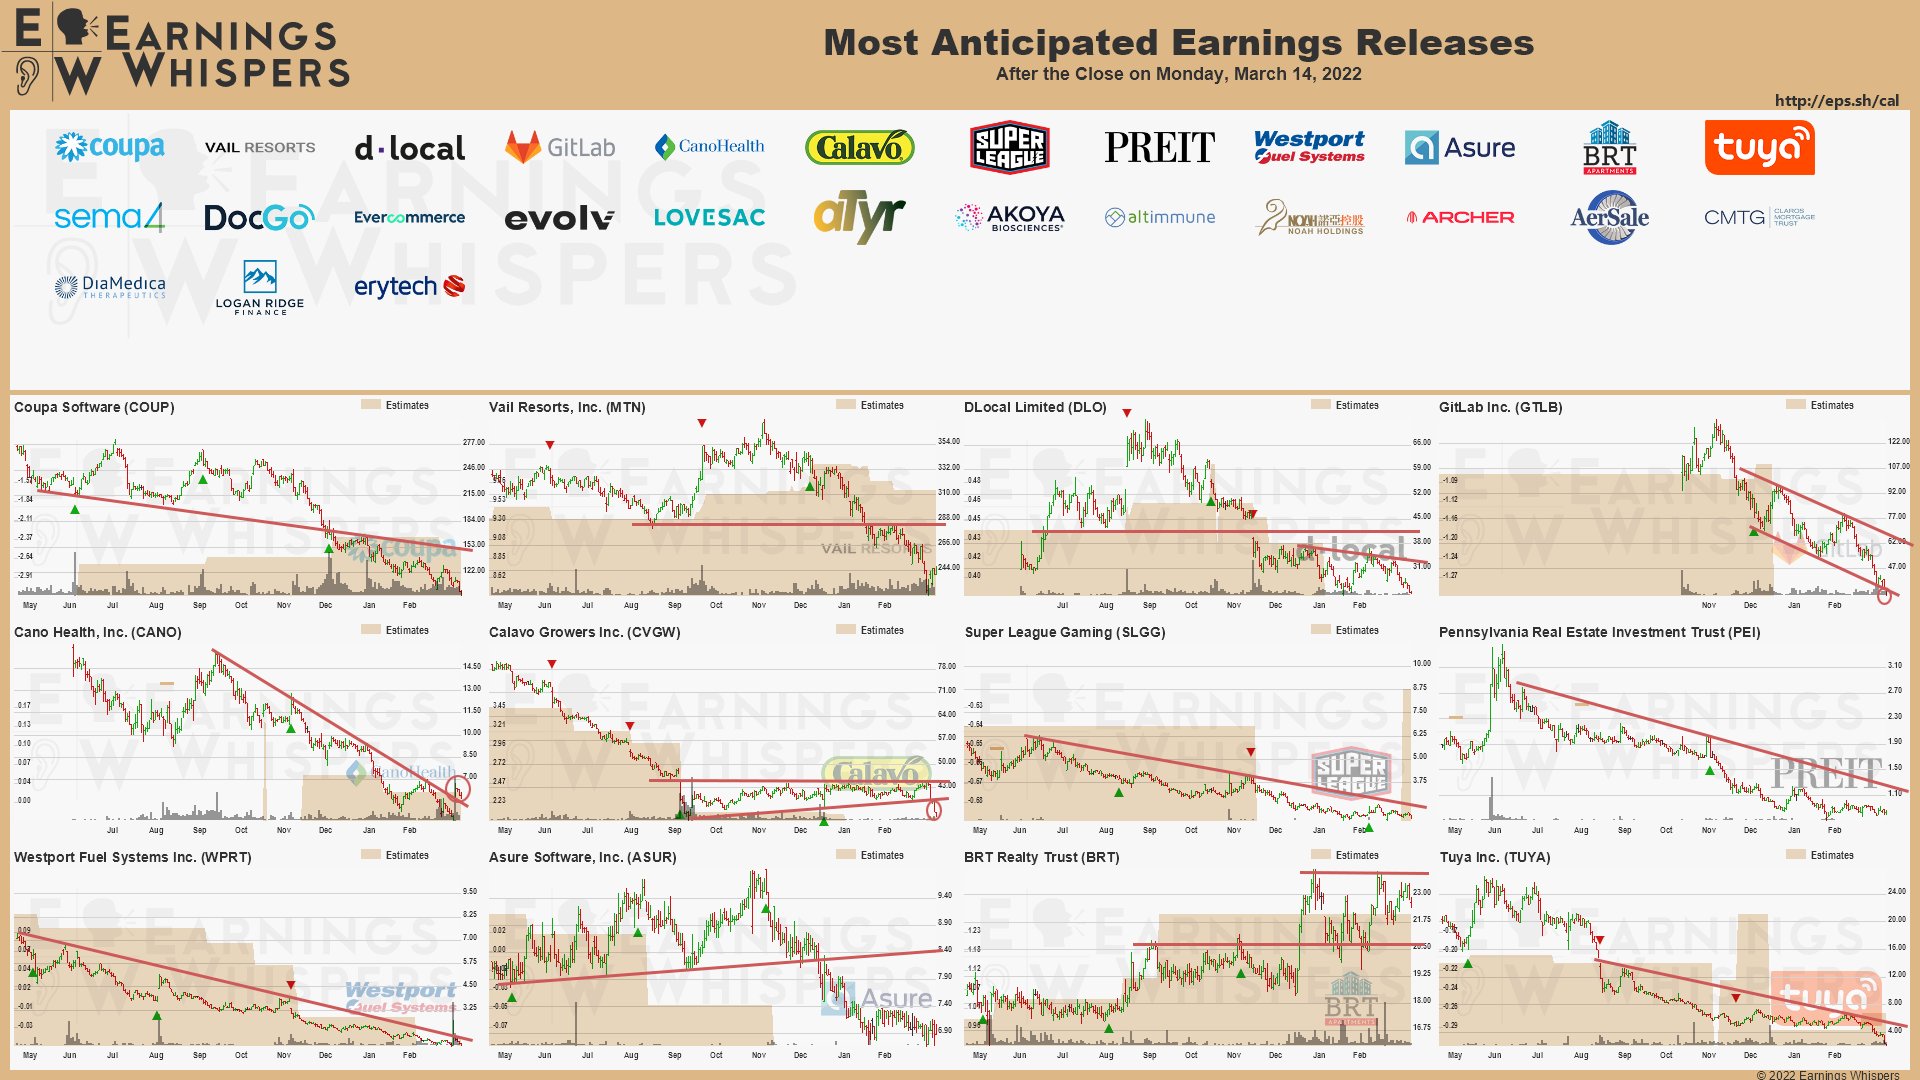 20220314 Earnings after